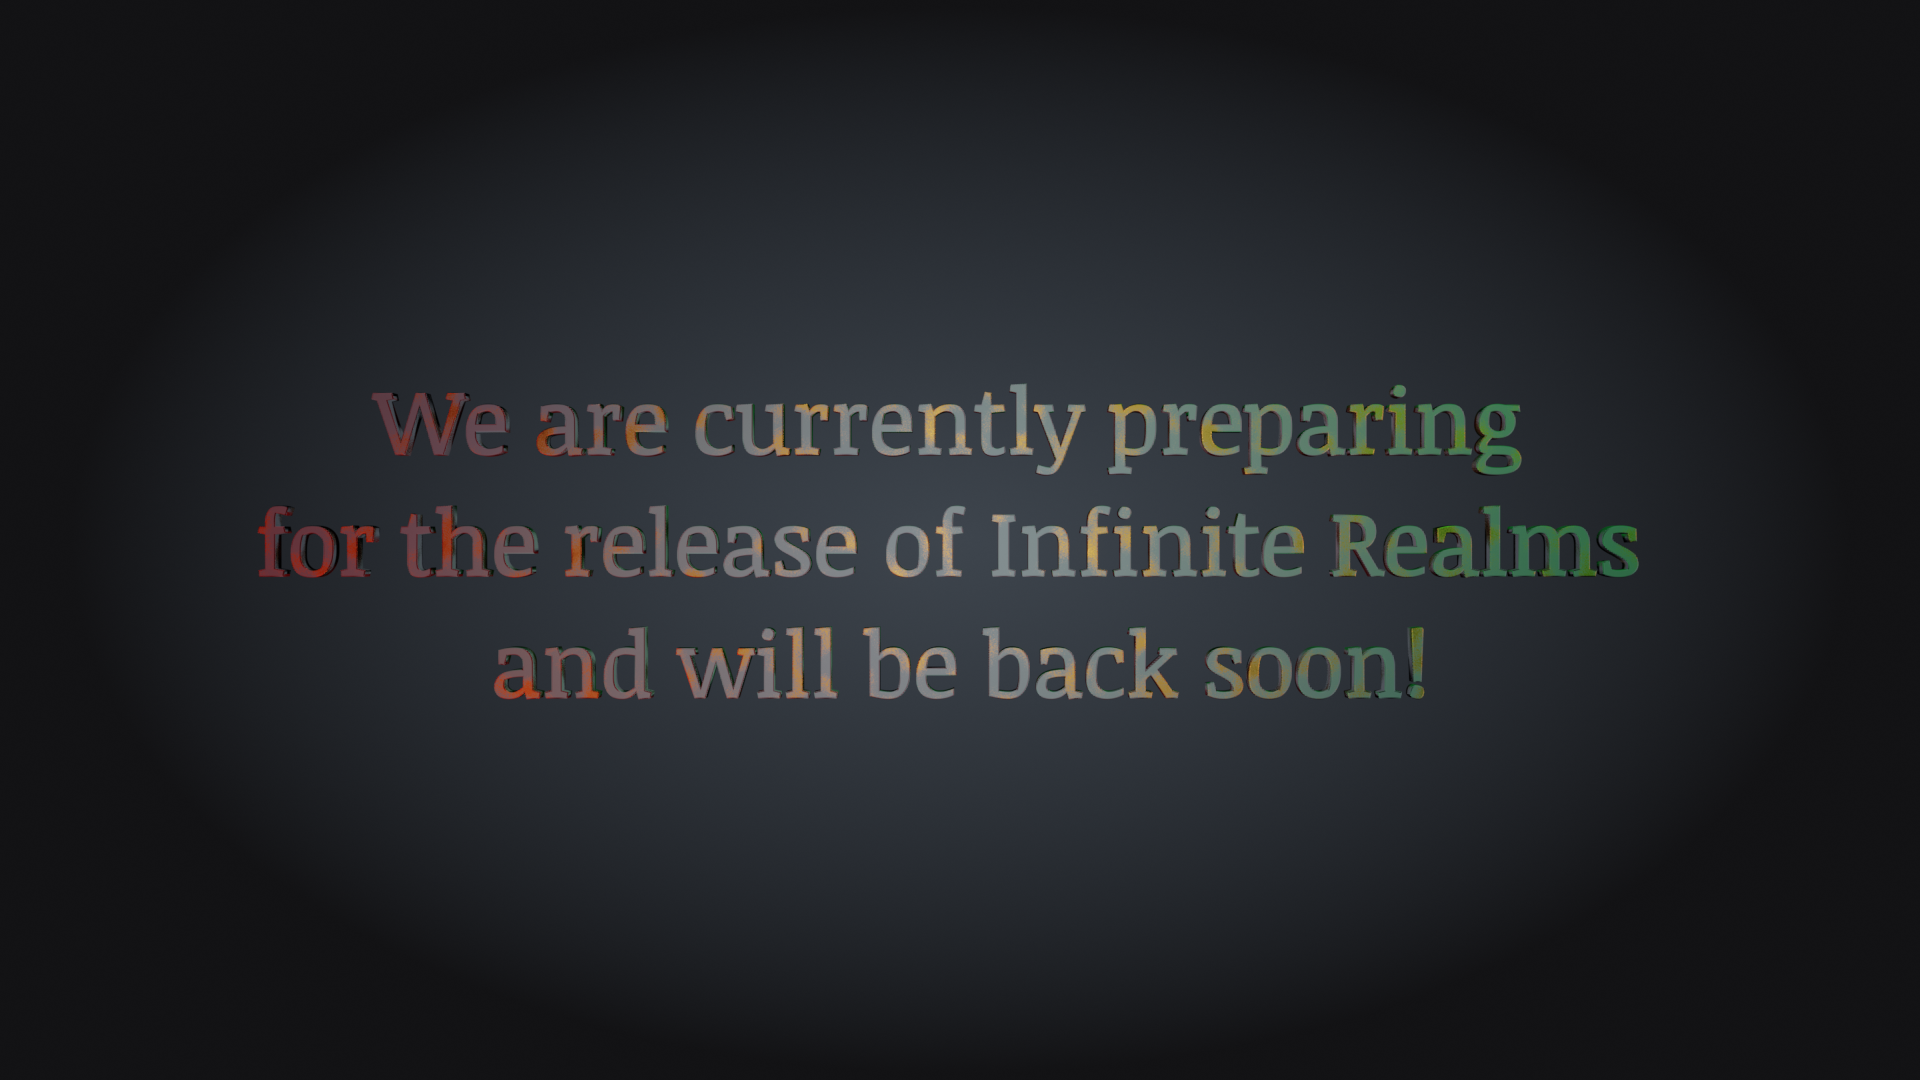 We are currently preparing for the release of Infinite Realms and will be back soon!